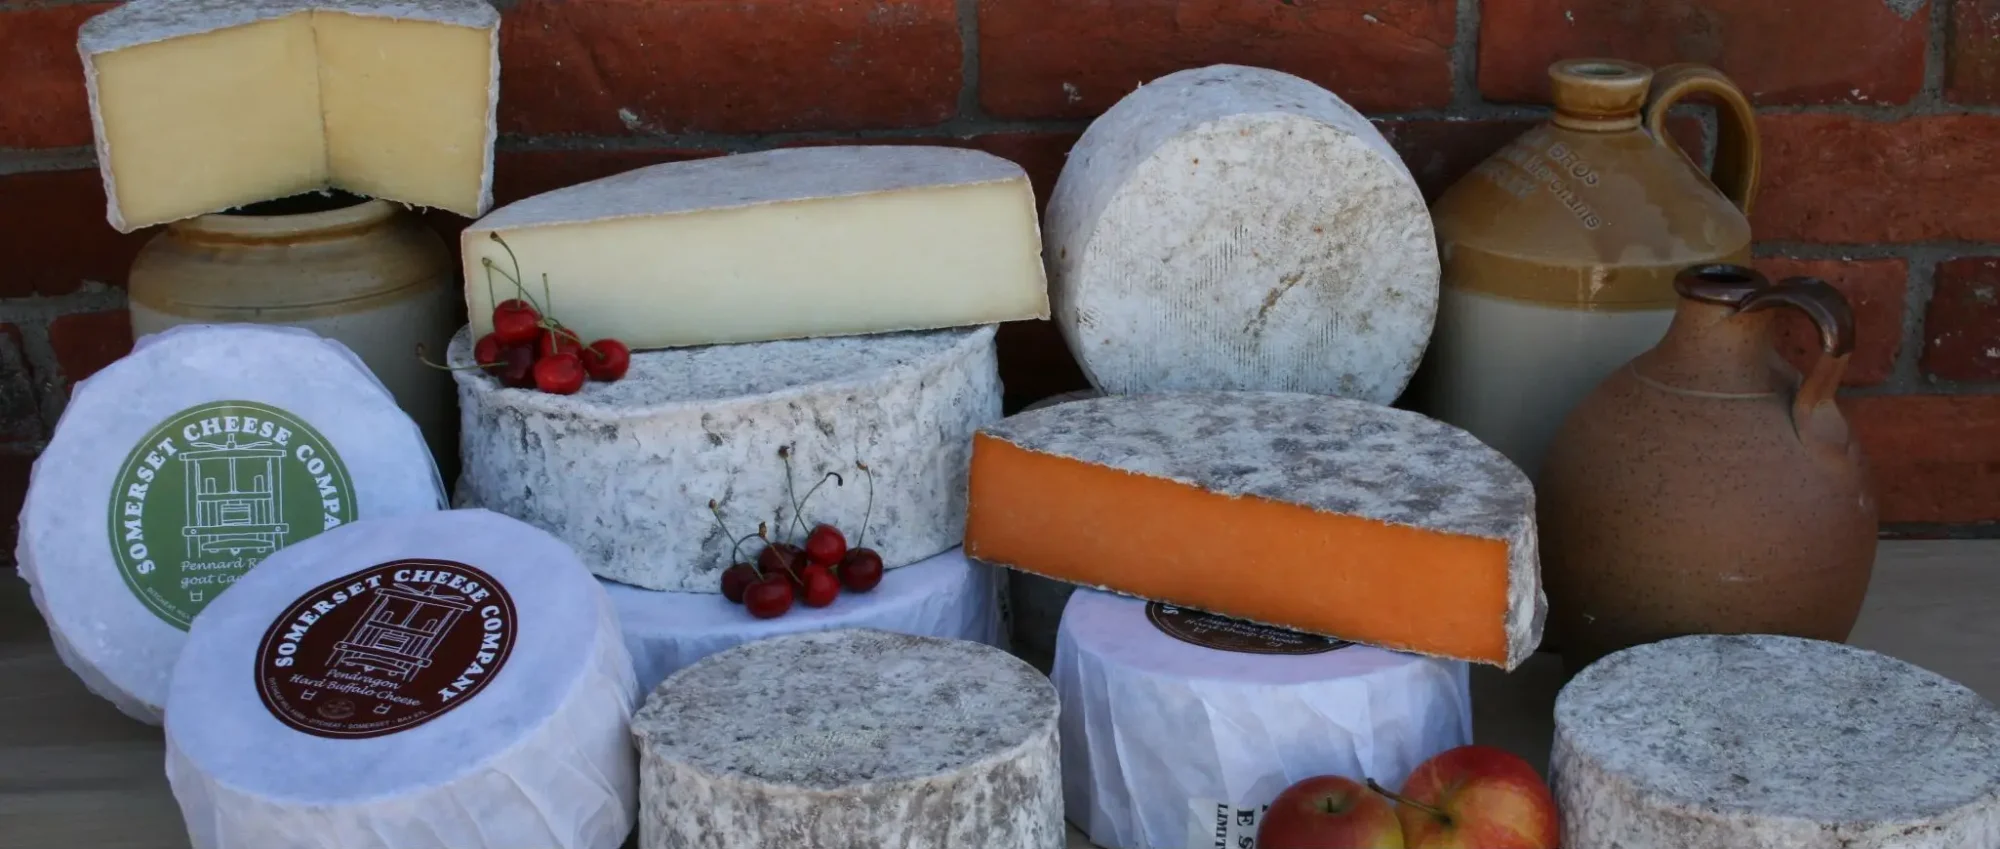 An assortment of cheeses from the Somerset Cheese Company